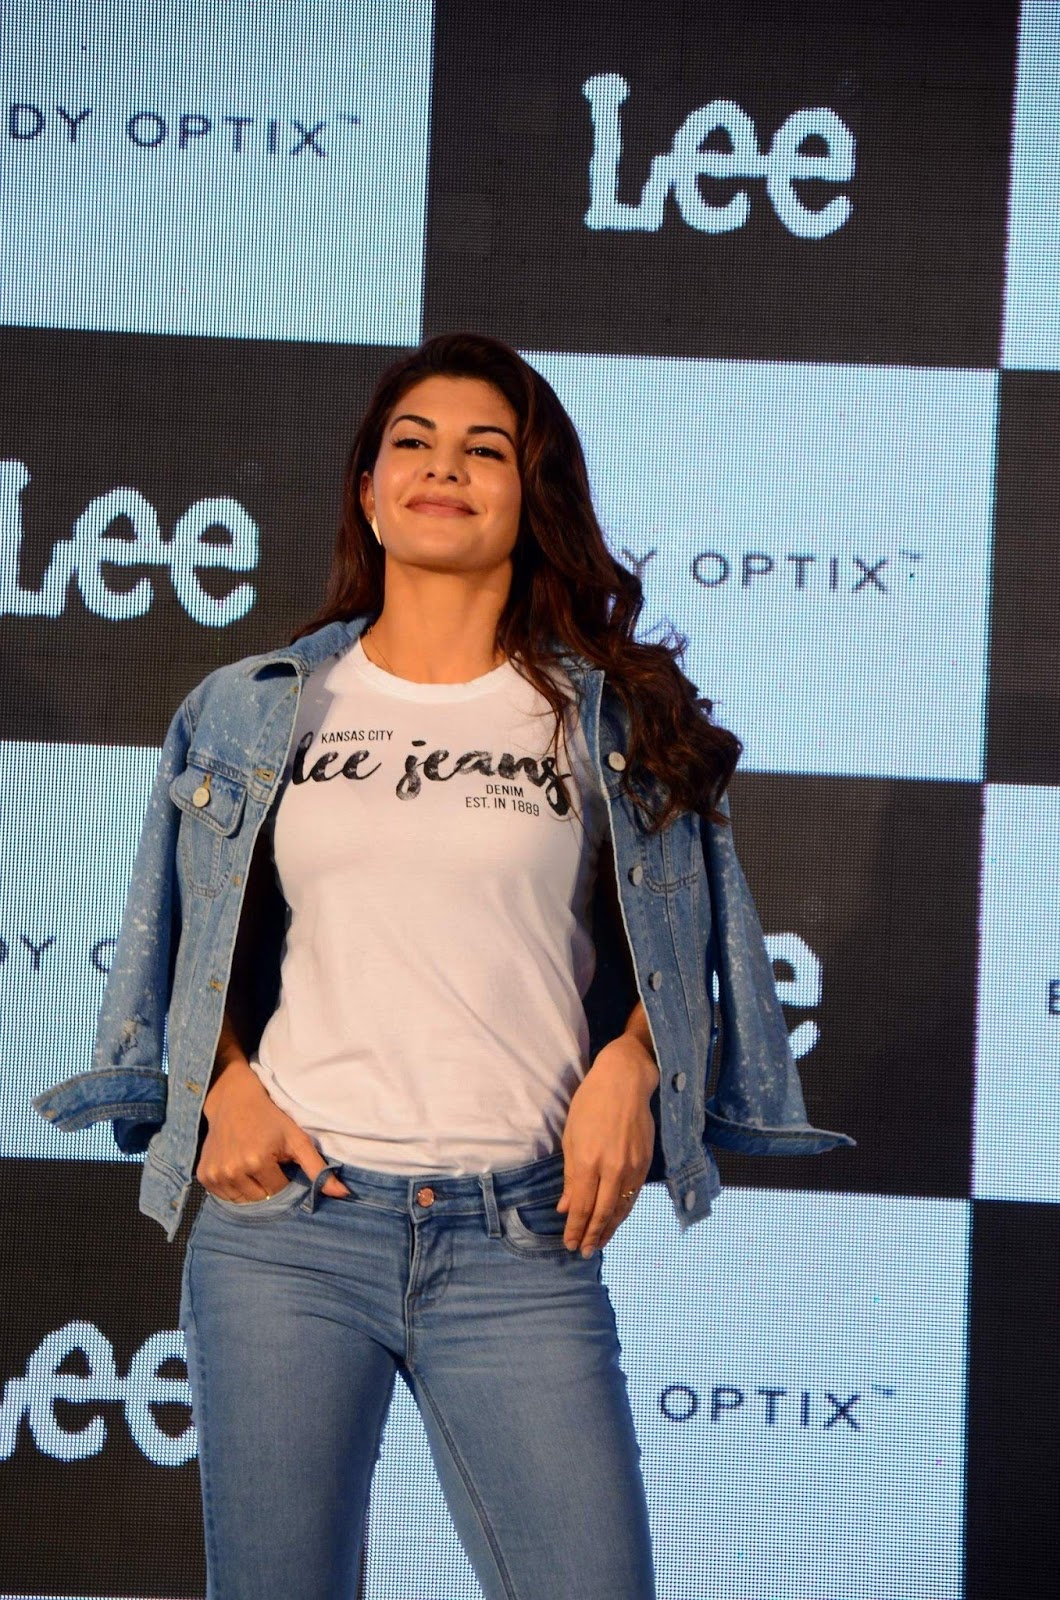 Jacqueline Fernandez Puts Her Stunning Figure On Show As She Launches Lee Denim Stores In India As Brand Ambassador